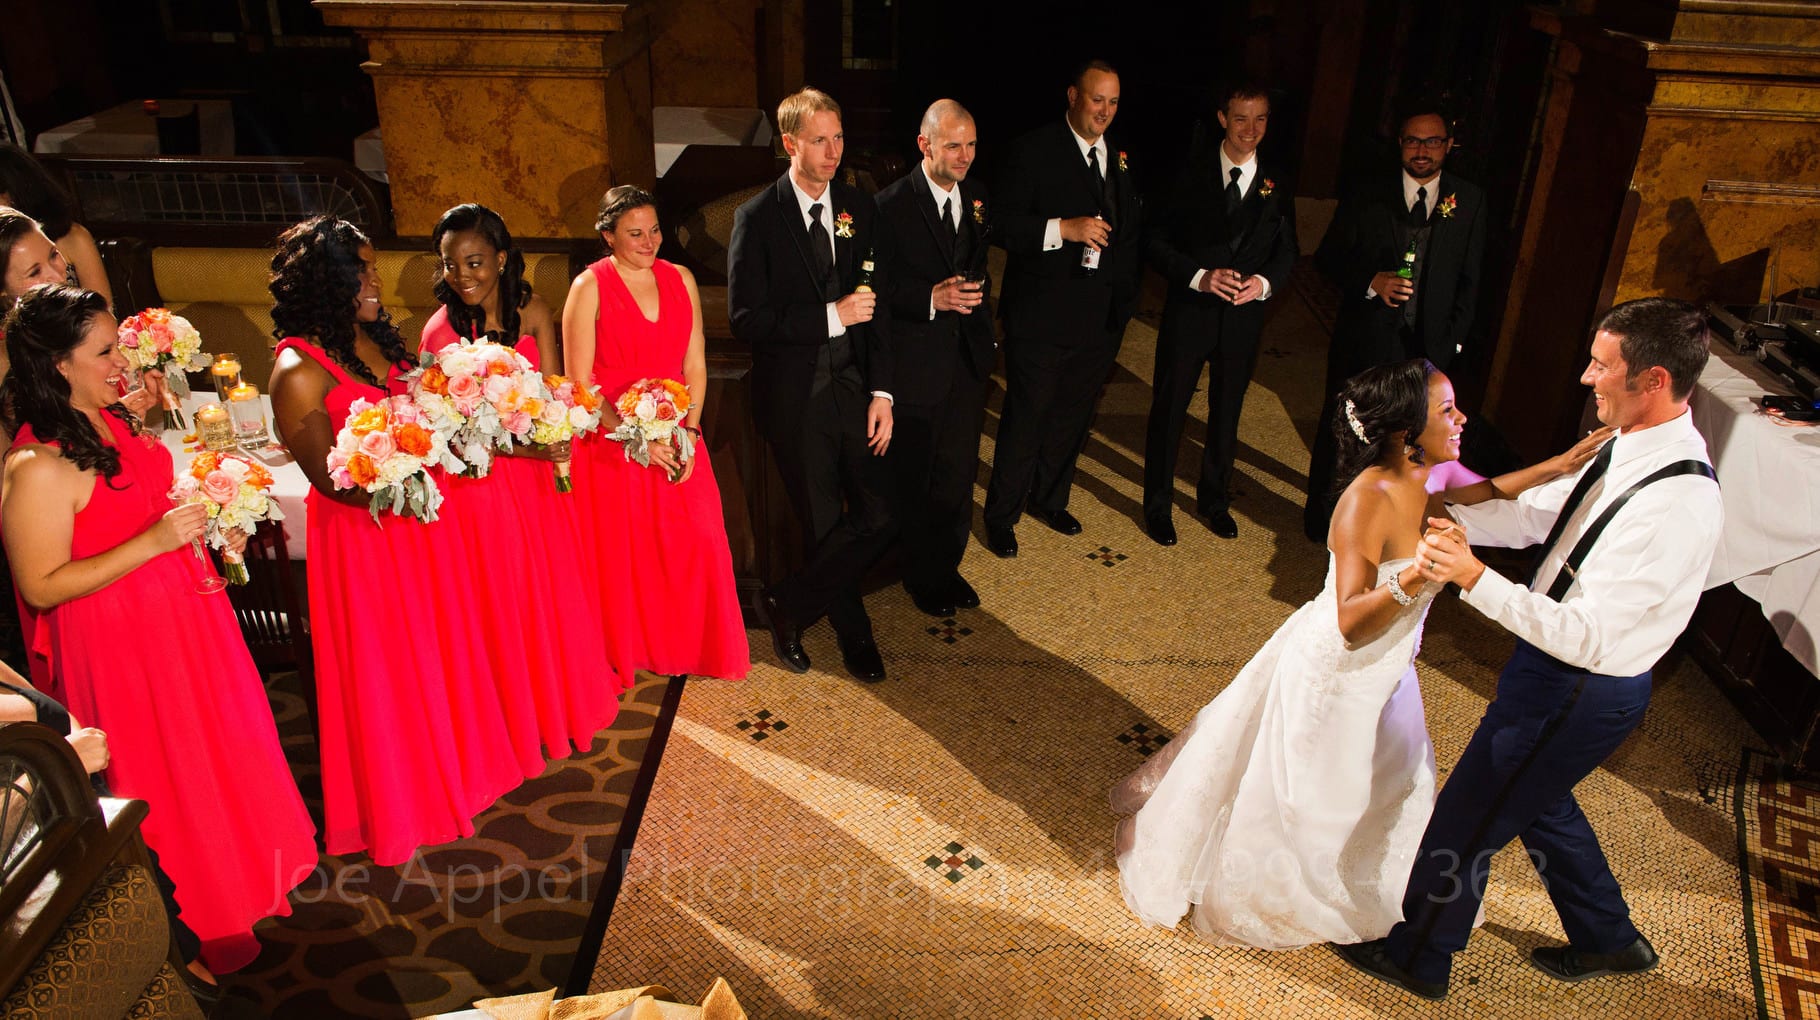 Seen from above, a bride and groom share their first dance in front of their bridal party.